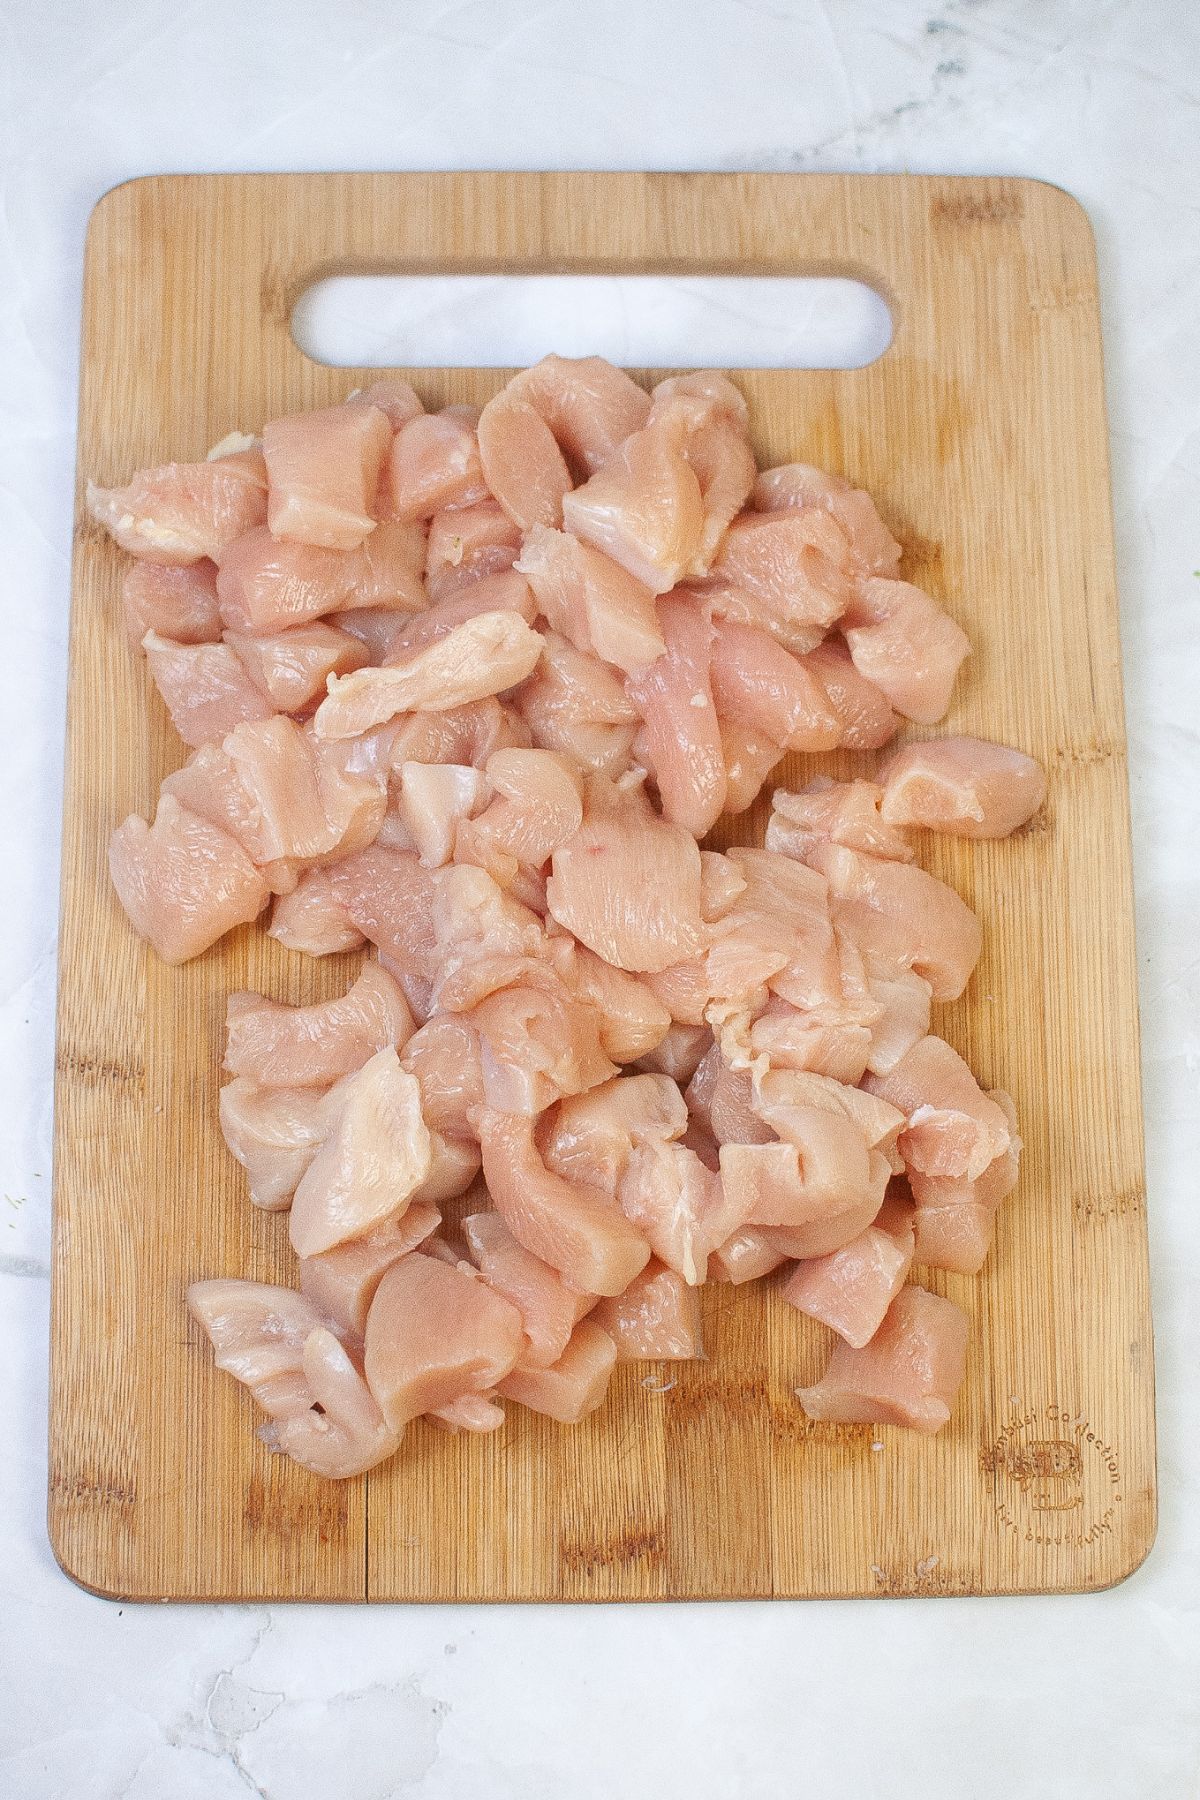 chicken breast cut into chunks on a wooden cutting board